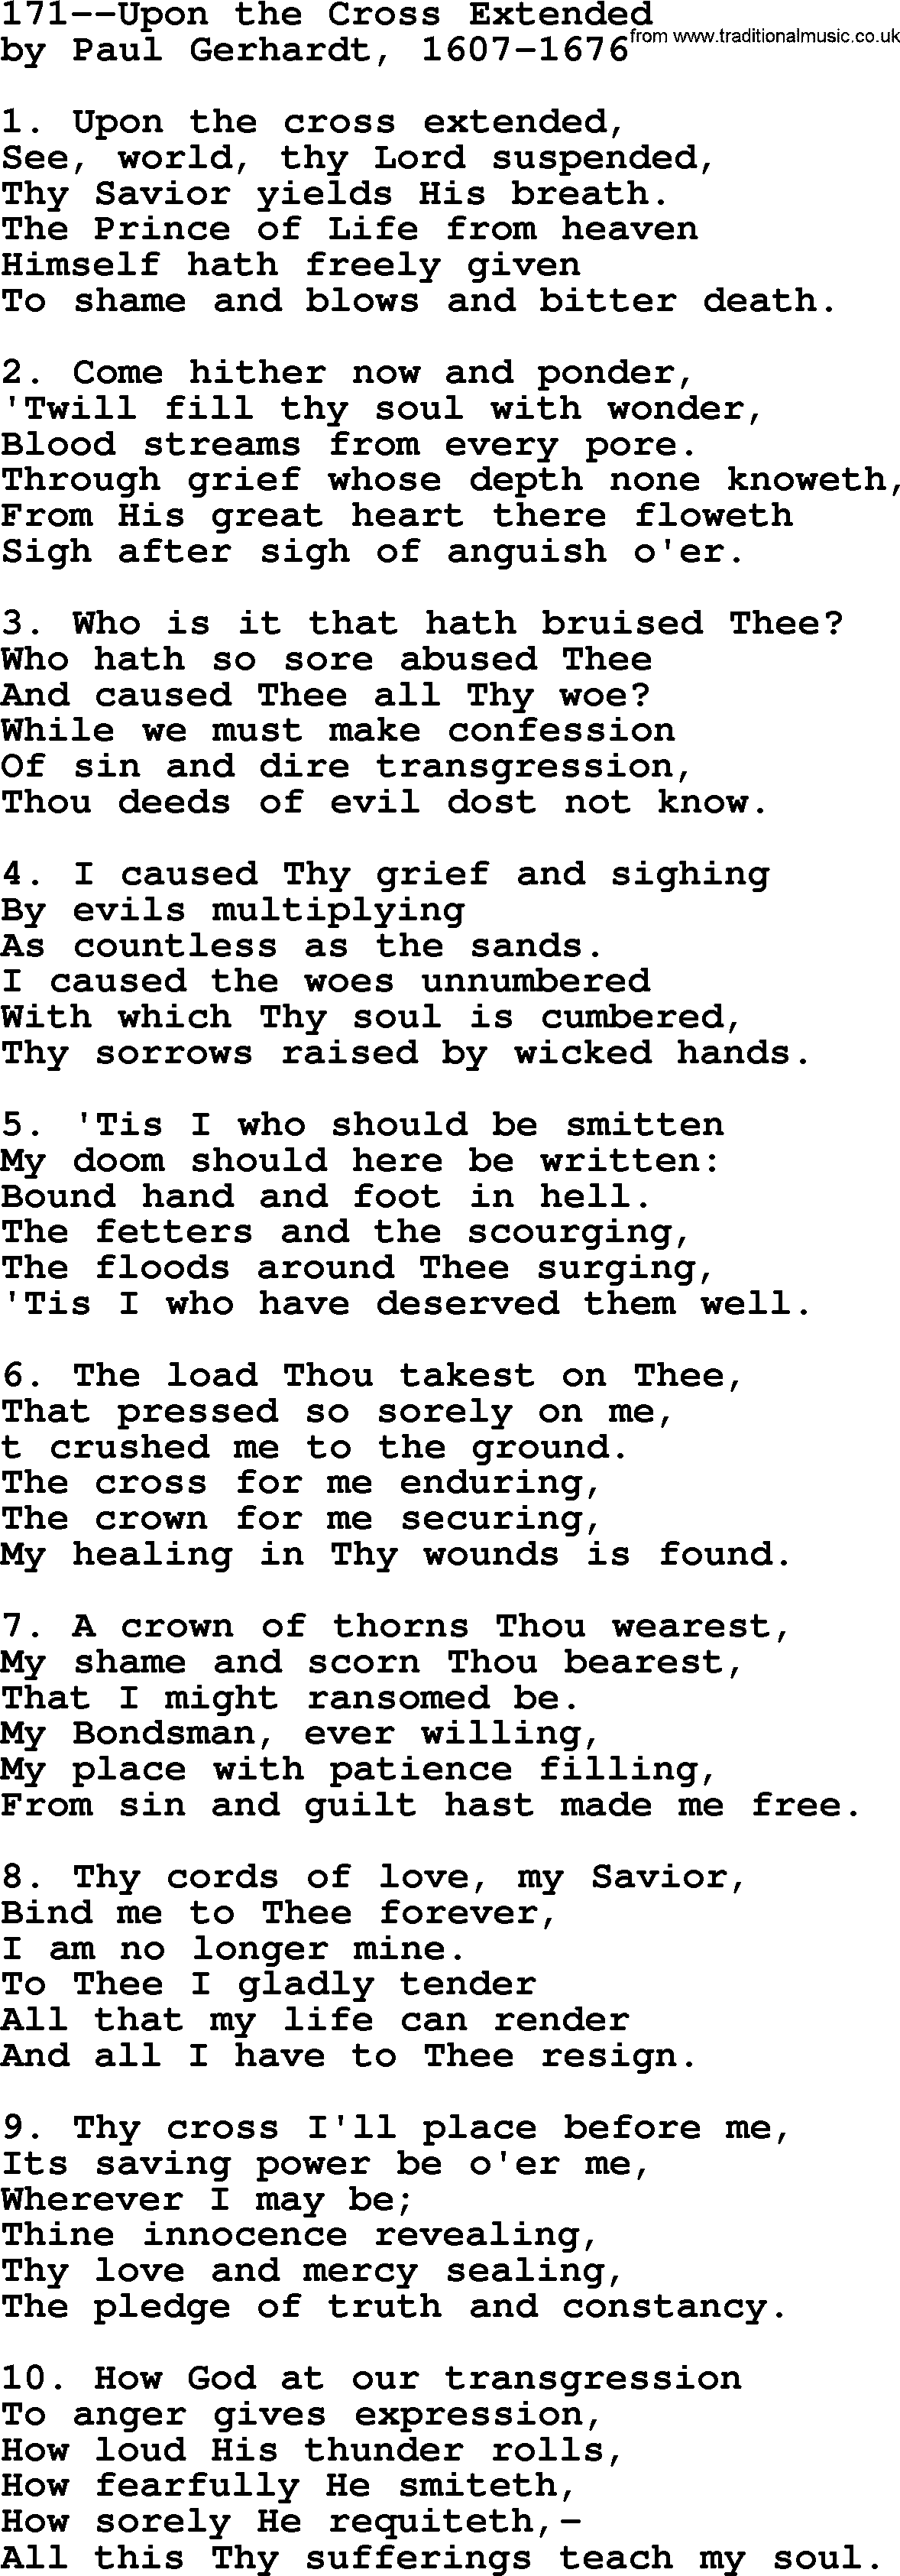 Lutheran Hymn: 171--Upon the Cross Extended.txt lyrics with PDF